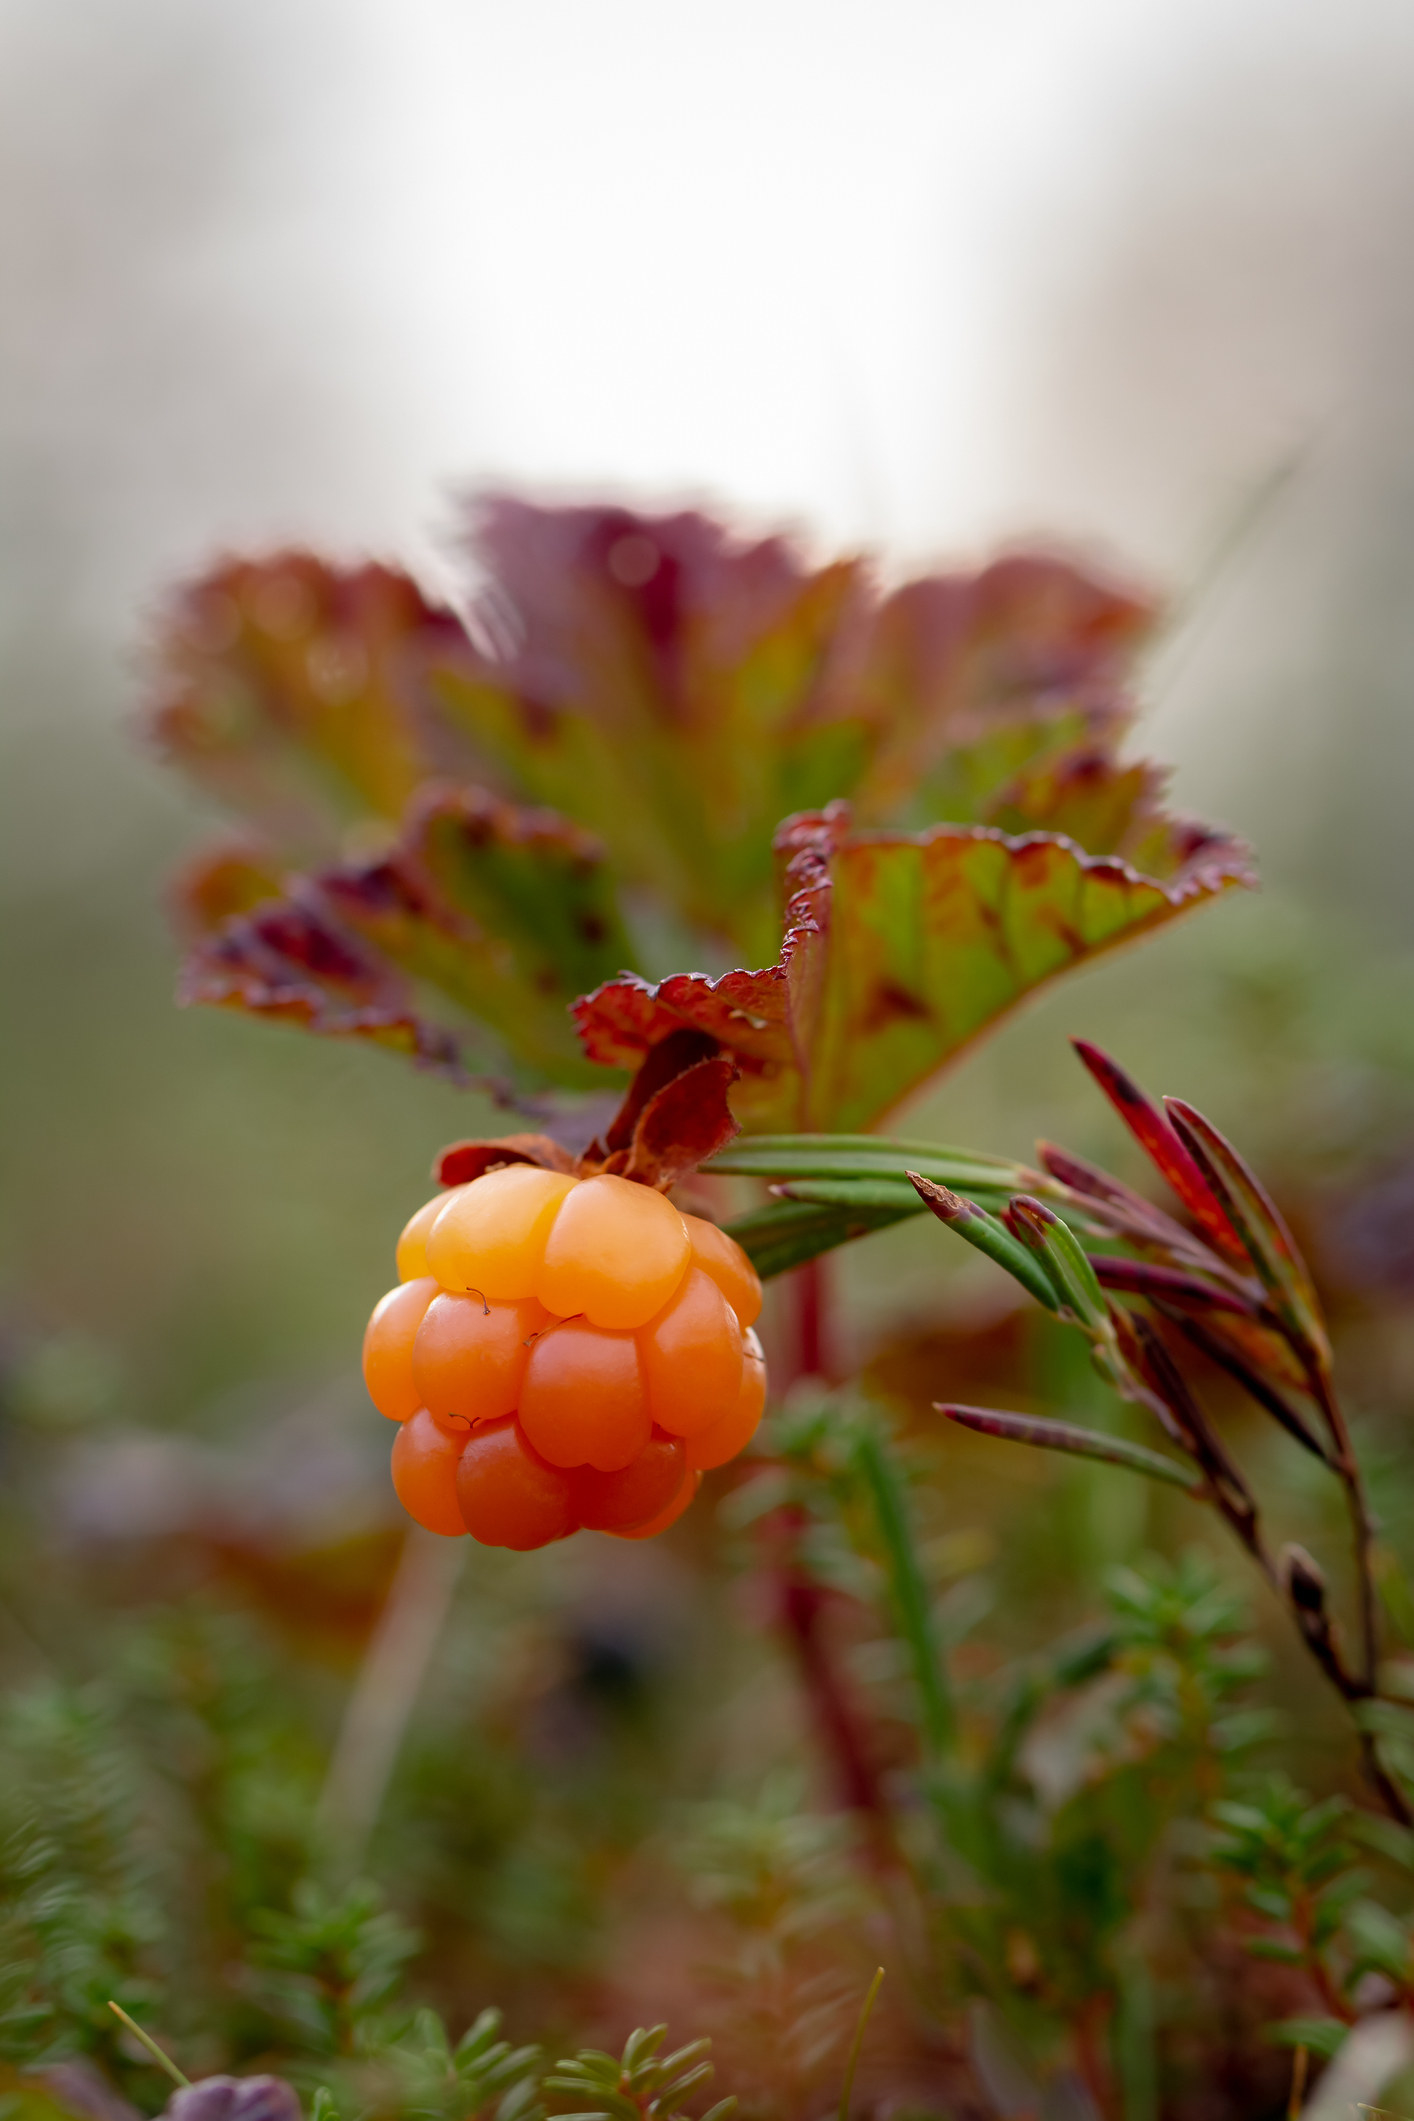 One ripe cloudberry growing on a bush with a leaf.